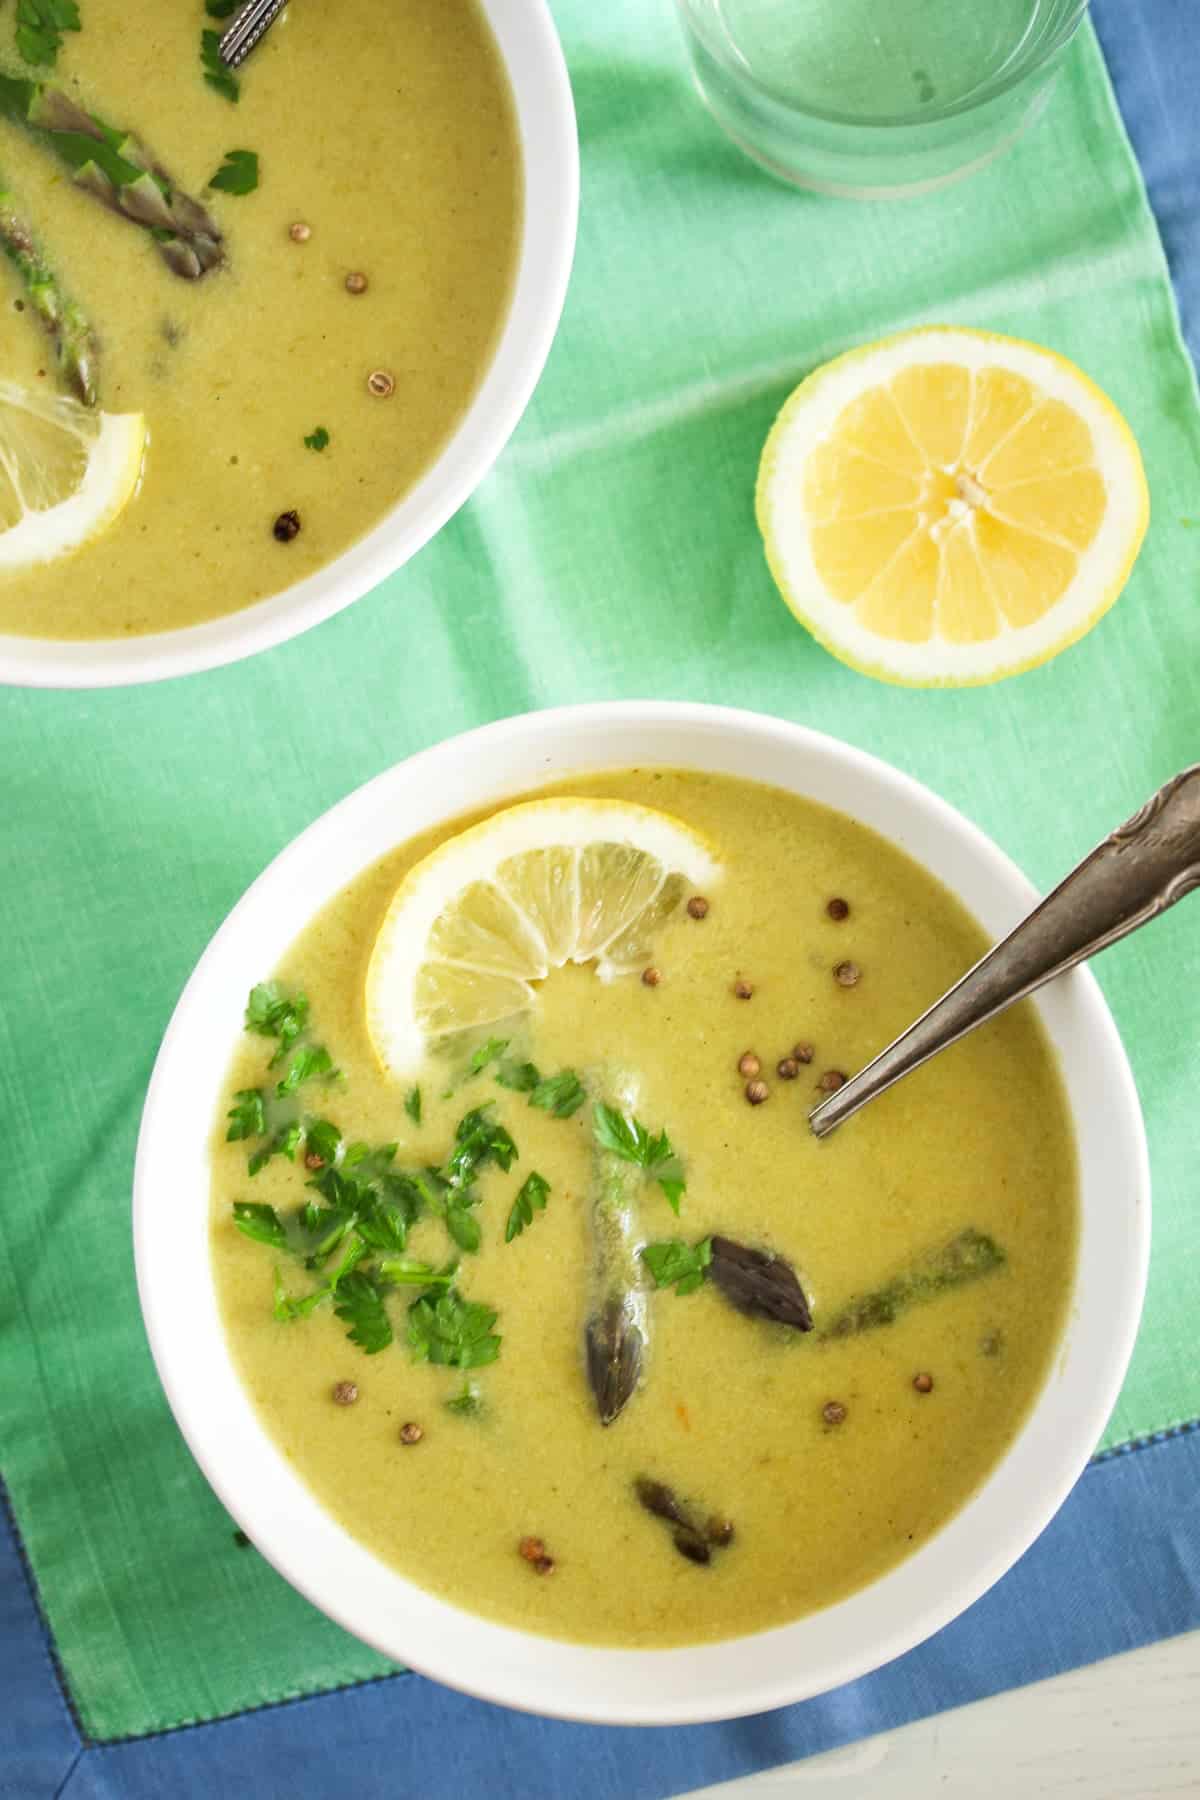 two bowl of soup with green asparagus on a green table cloth with blue margins.